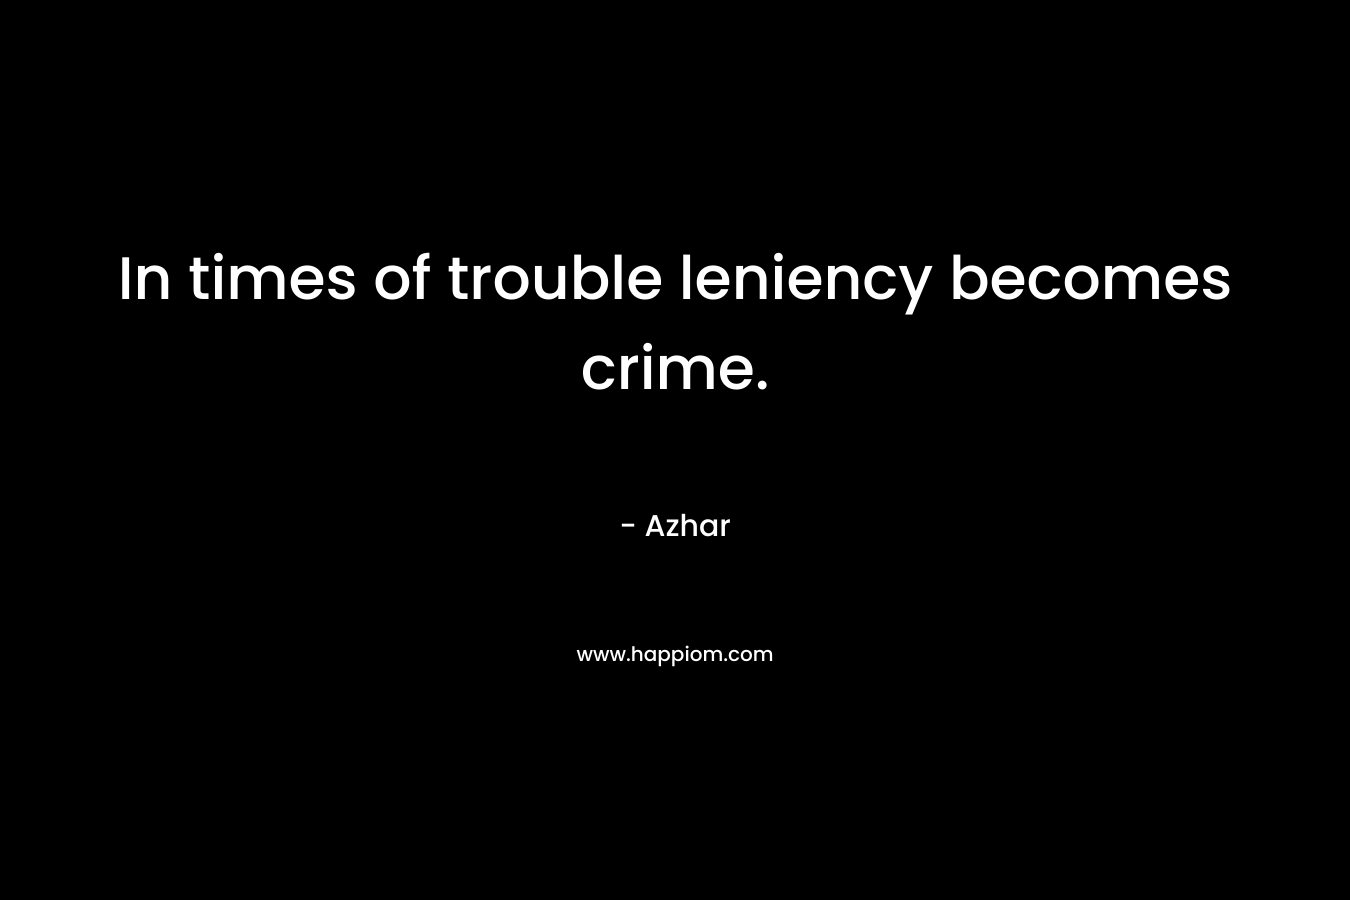 In times of trouble leniency becomes crime.